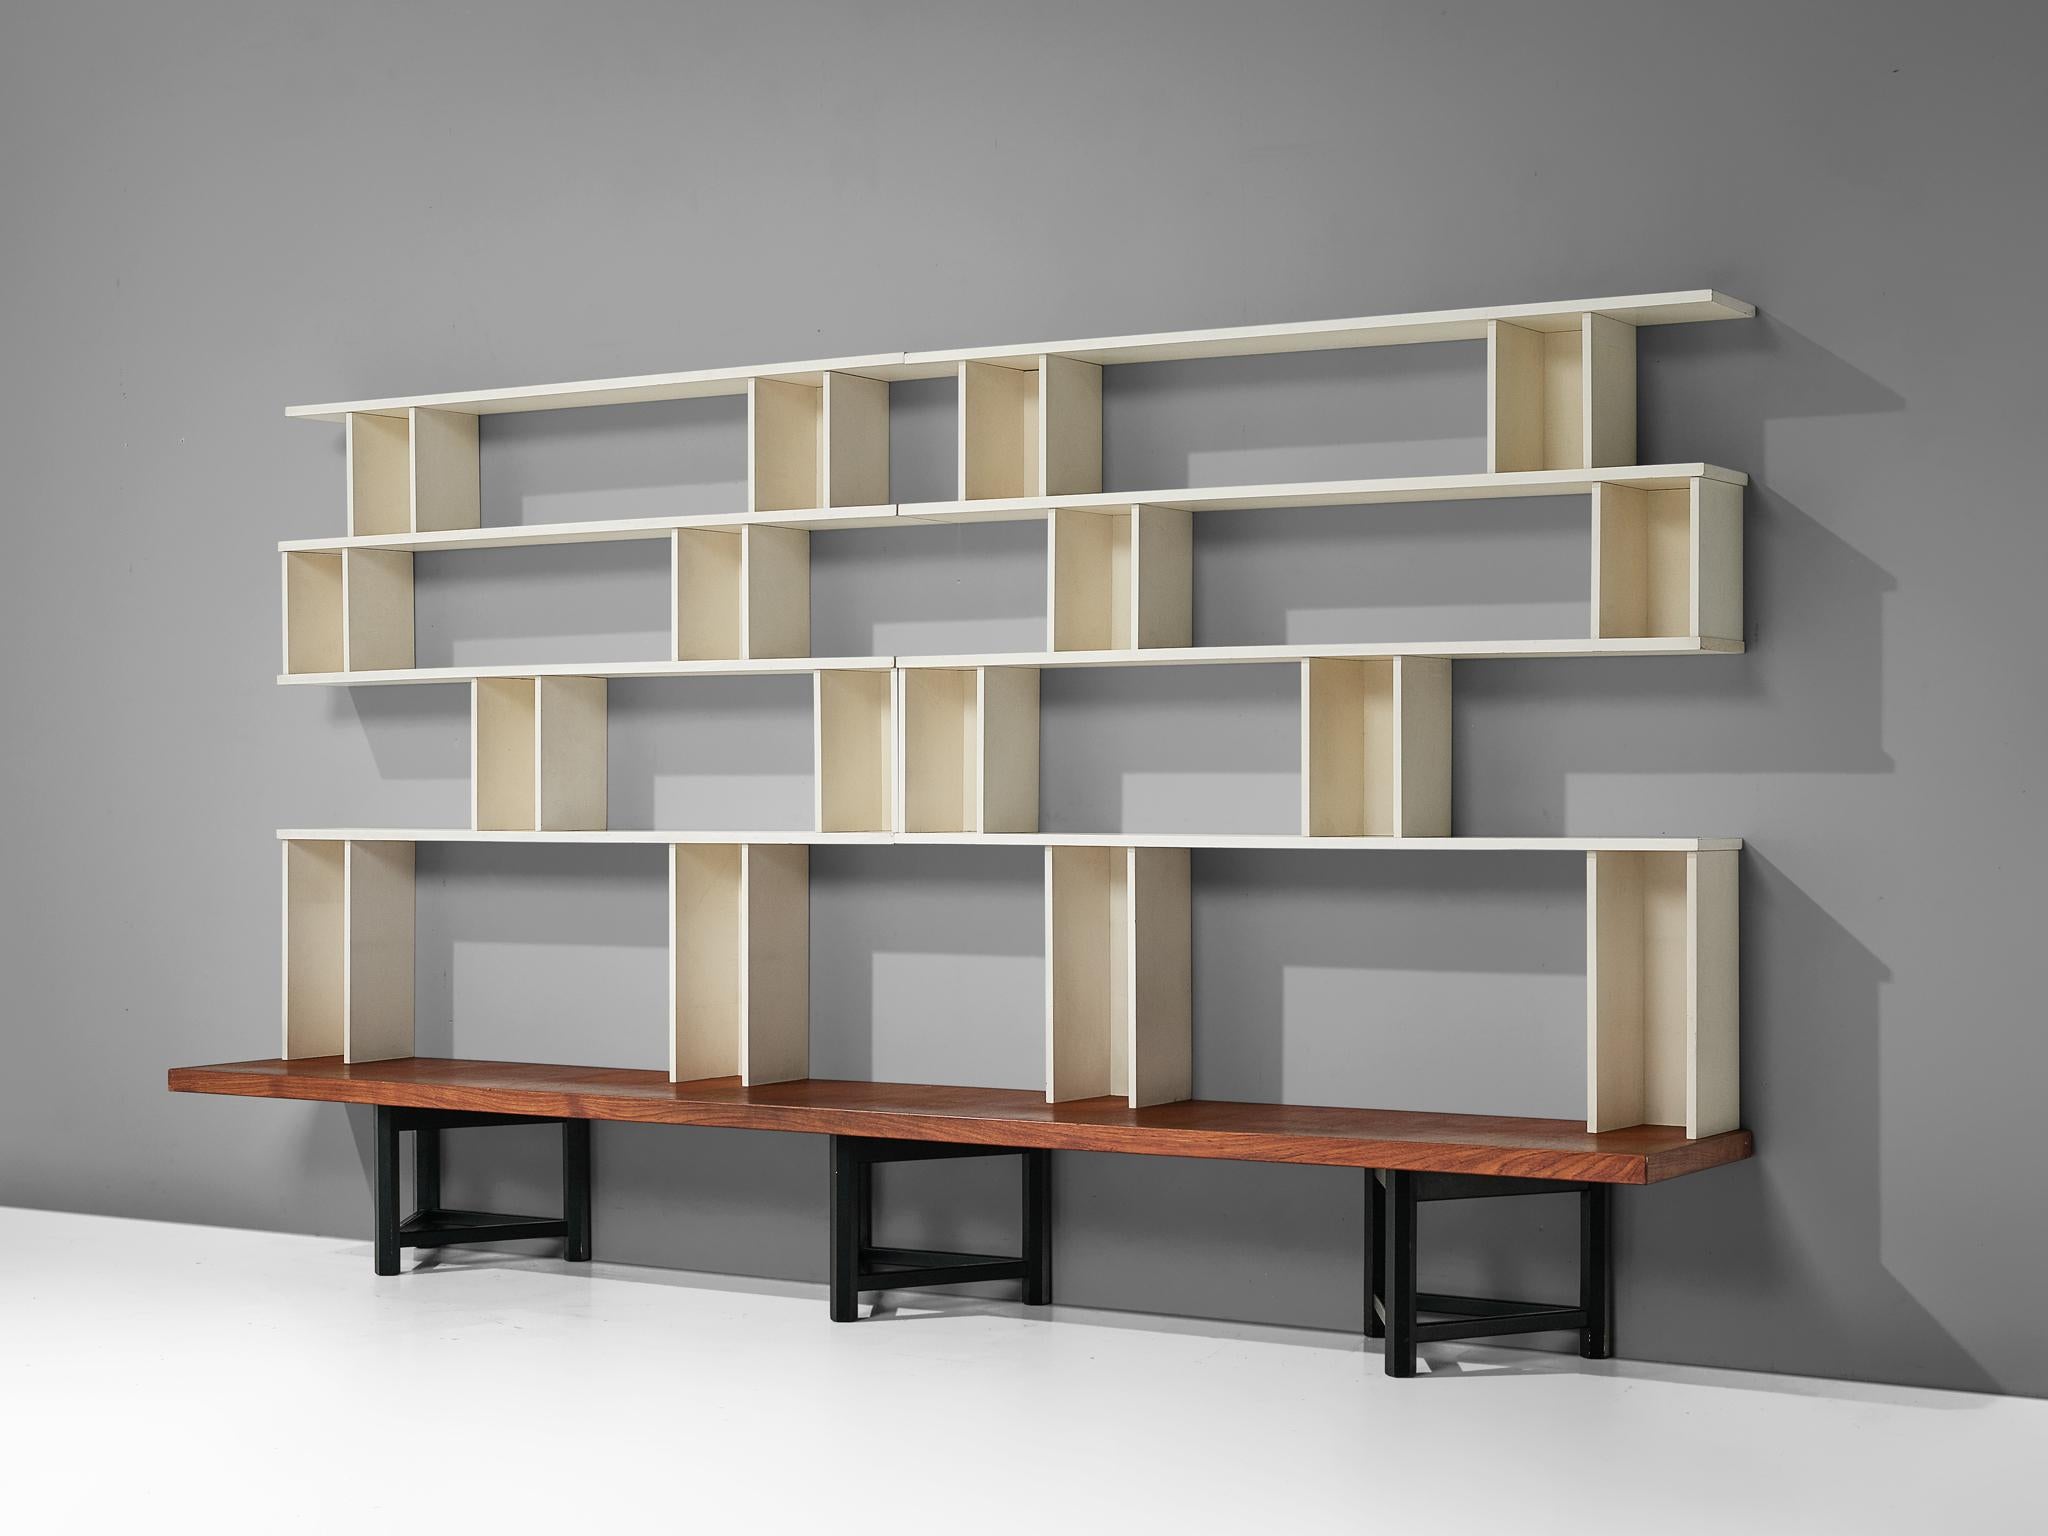 Carl Gustaf Hiort af Ornäs for Huonekalu Mikko Nupponen, 'Välipala' bookcase, teak, wood, Finland, 1950s

This bookcase is designed by the Finnish designer Carl Gustaf Hiort. It is build out of several wooden elements in different natural colors,